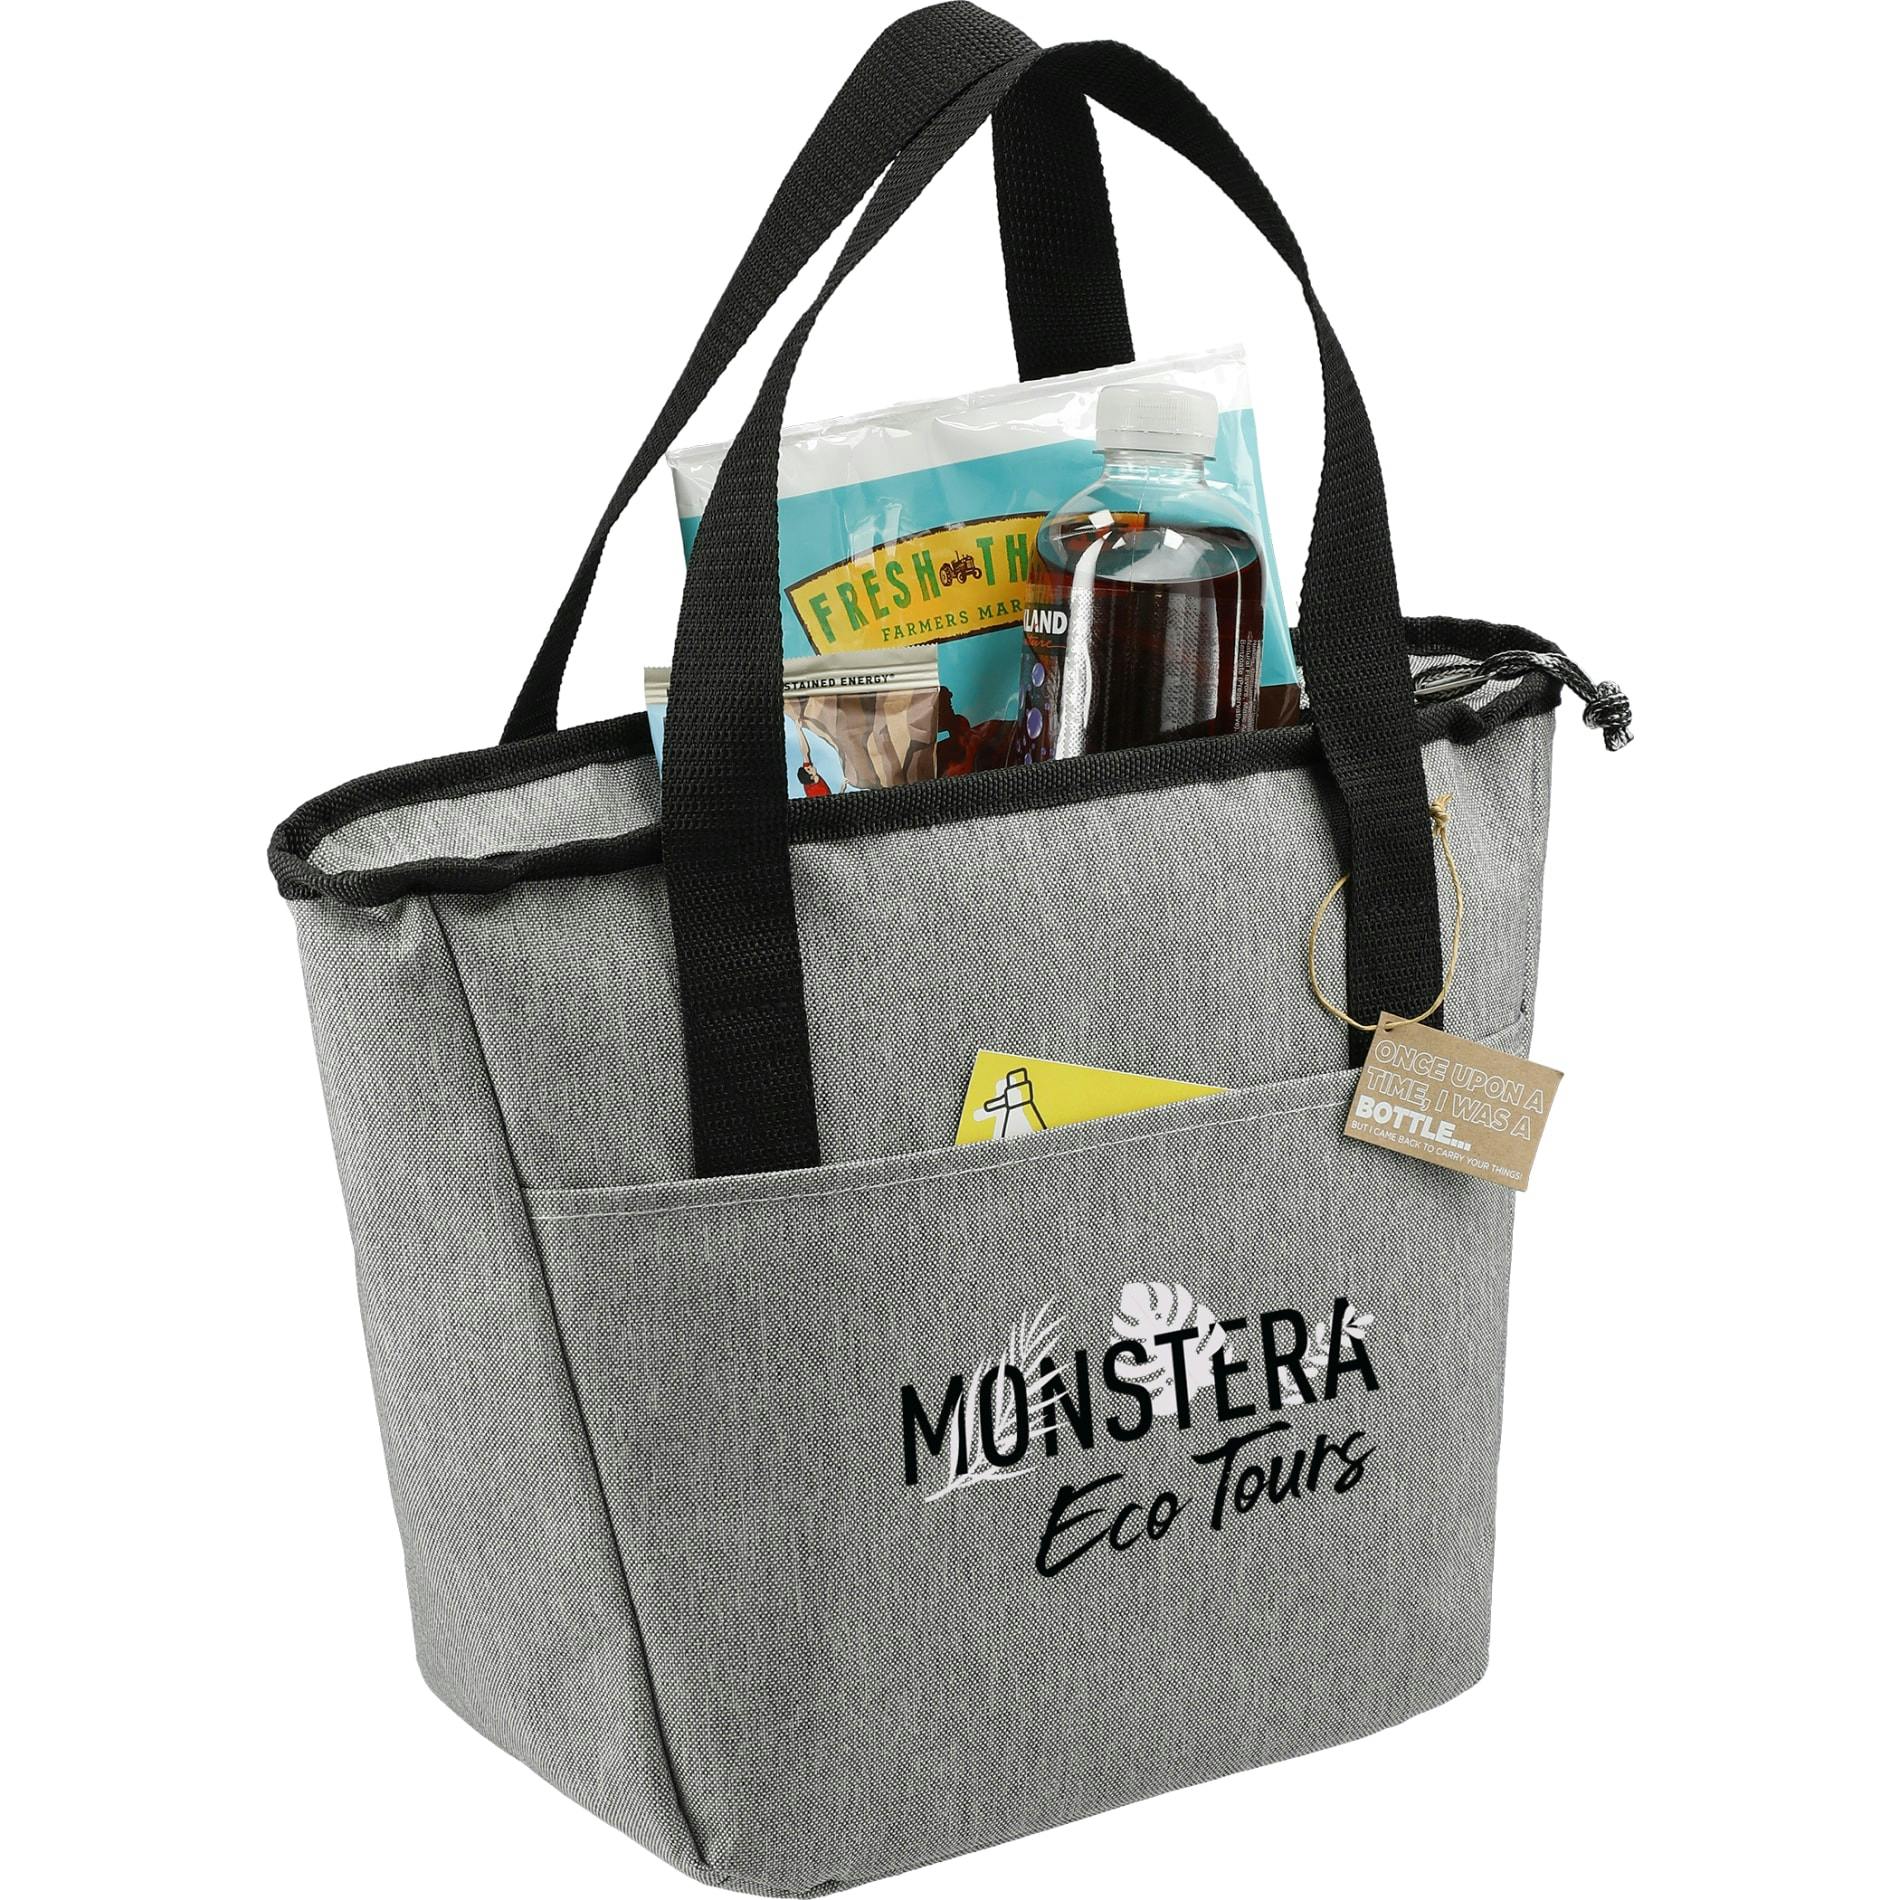 Merchant & Craft Revive Recycled 9 Can Tote Cooler - additional Image 1